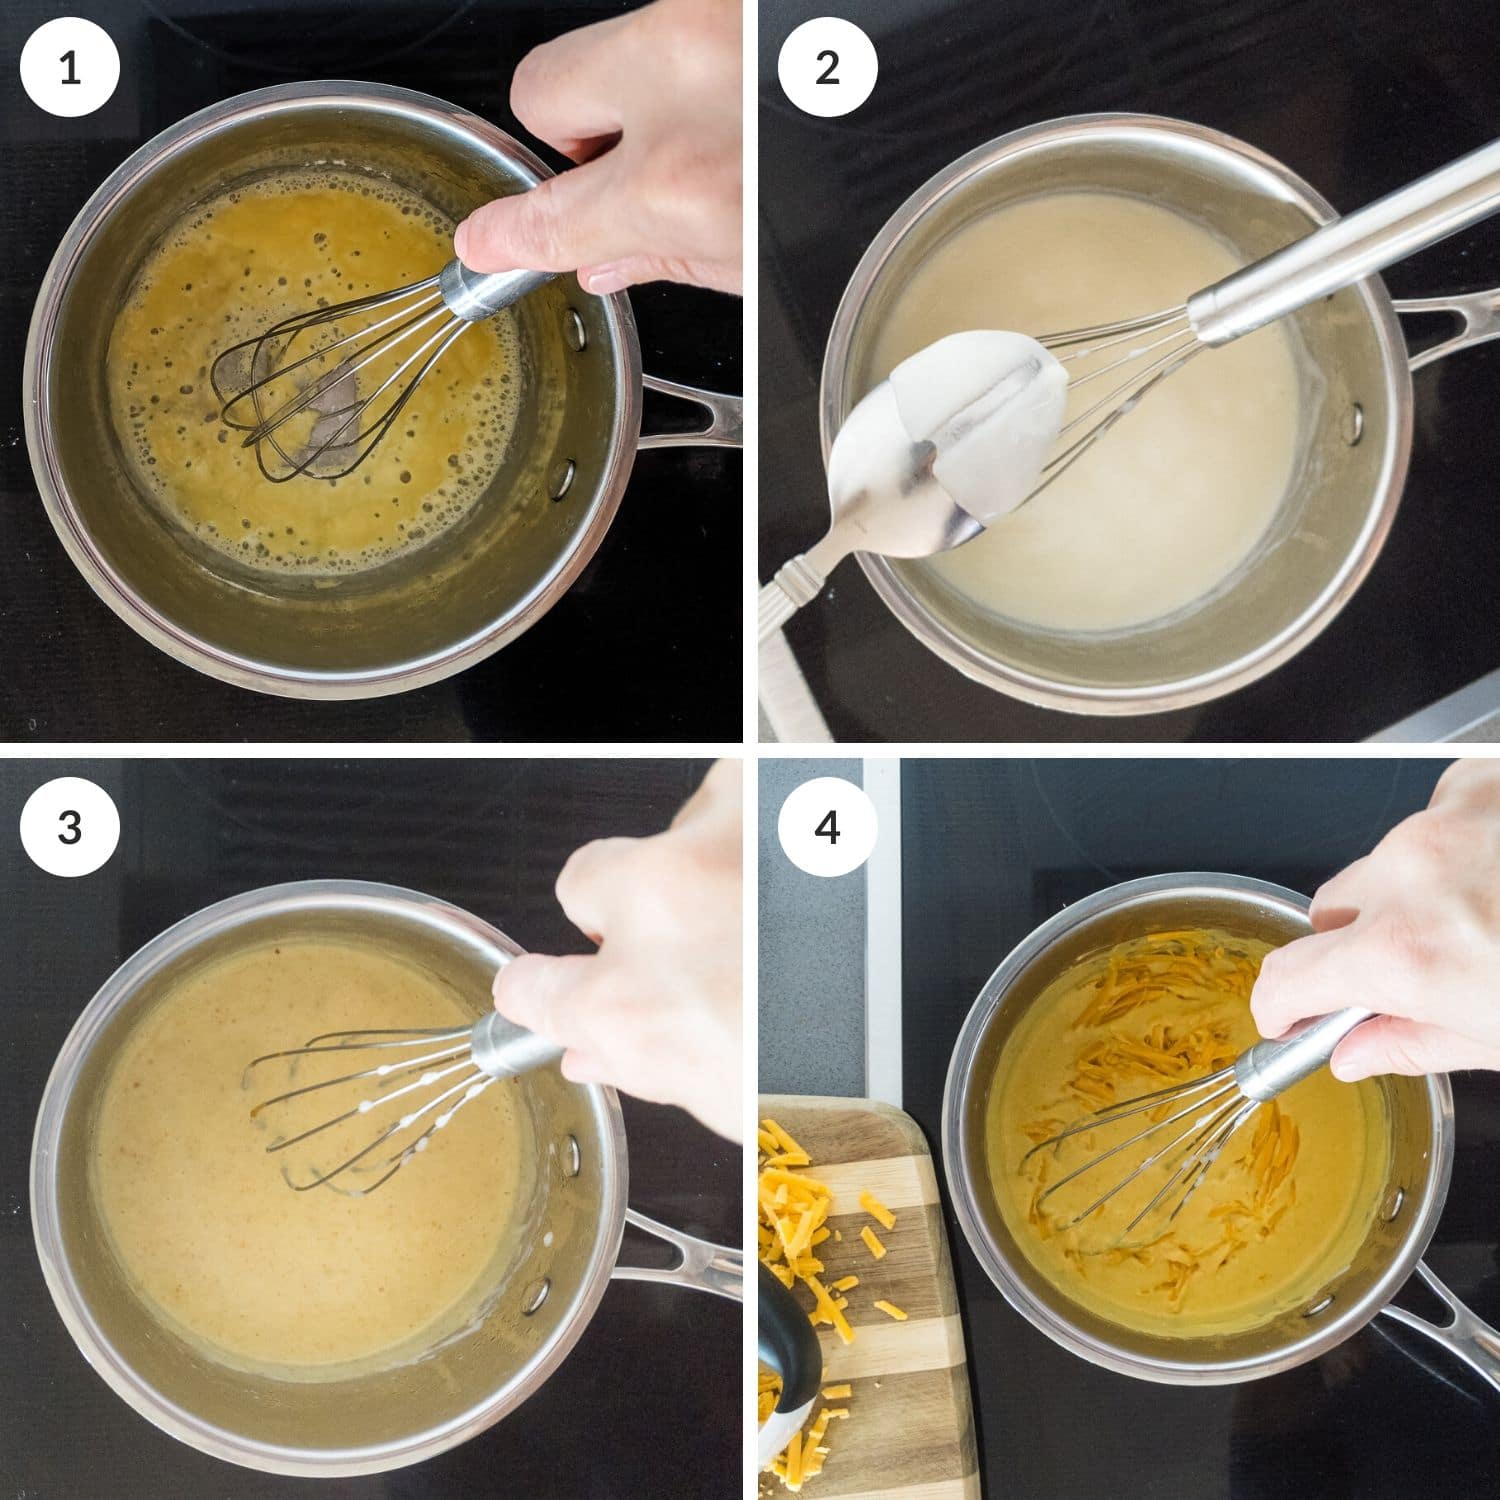 Step by step collage showing how to make nacho cheese from scratch.